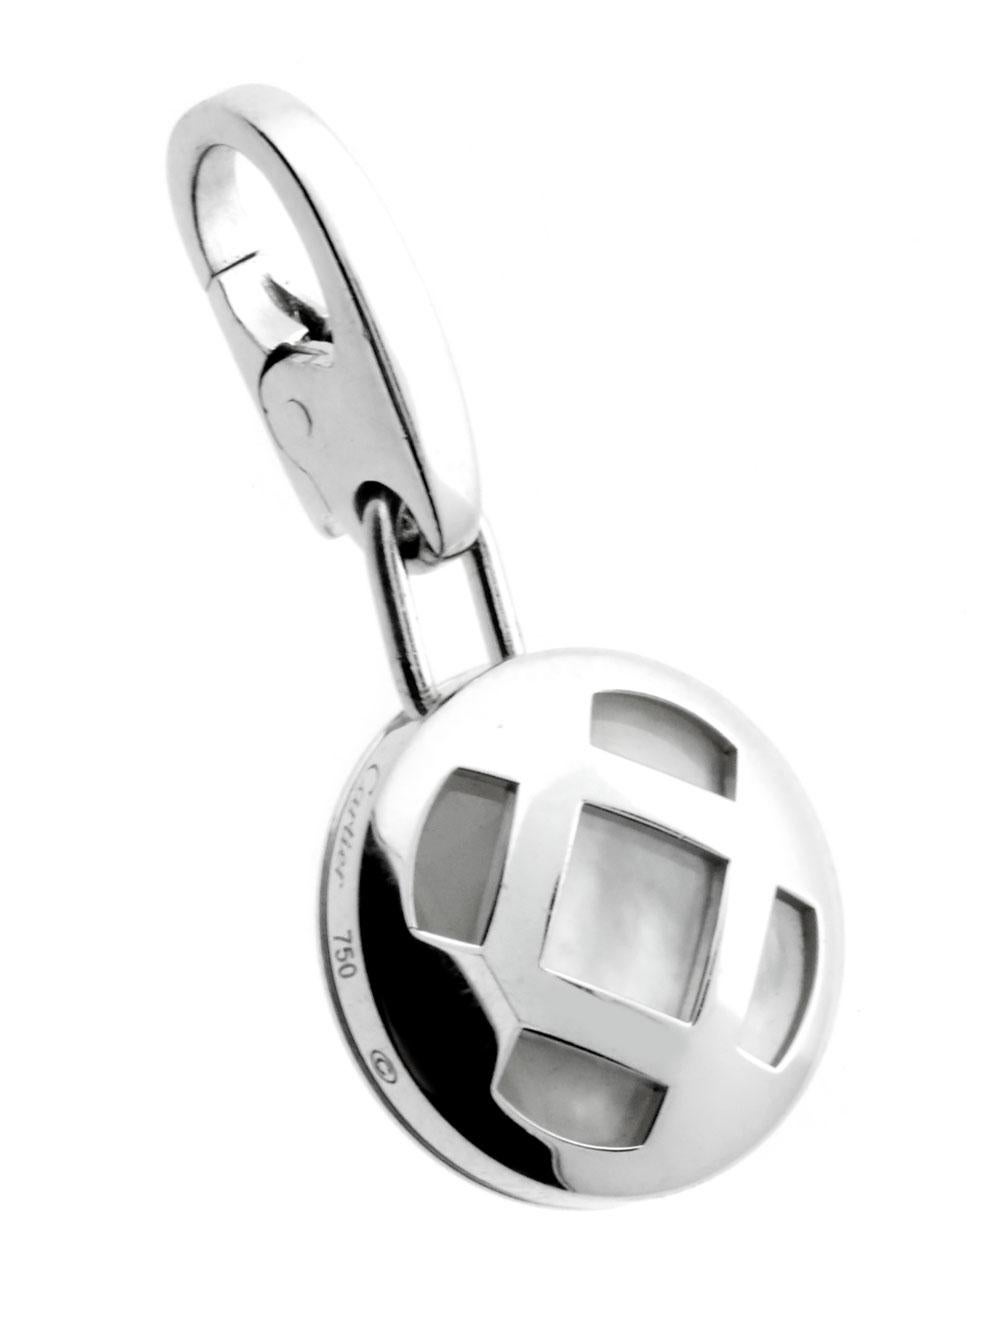 A chic authentic Cartier charm pendant in 18k white gold featuring a Mother of Pearl interior.

Dimensions: .47″ Inches Wide by 1.00″ Inch in Length

Inventory ID: 0000114